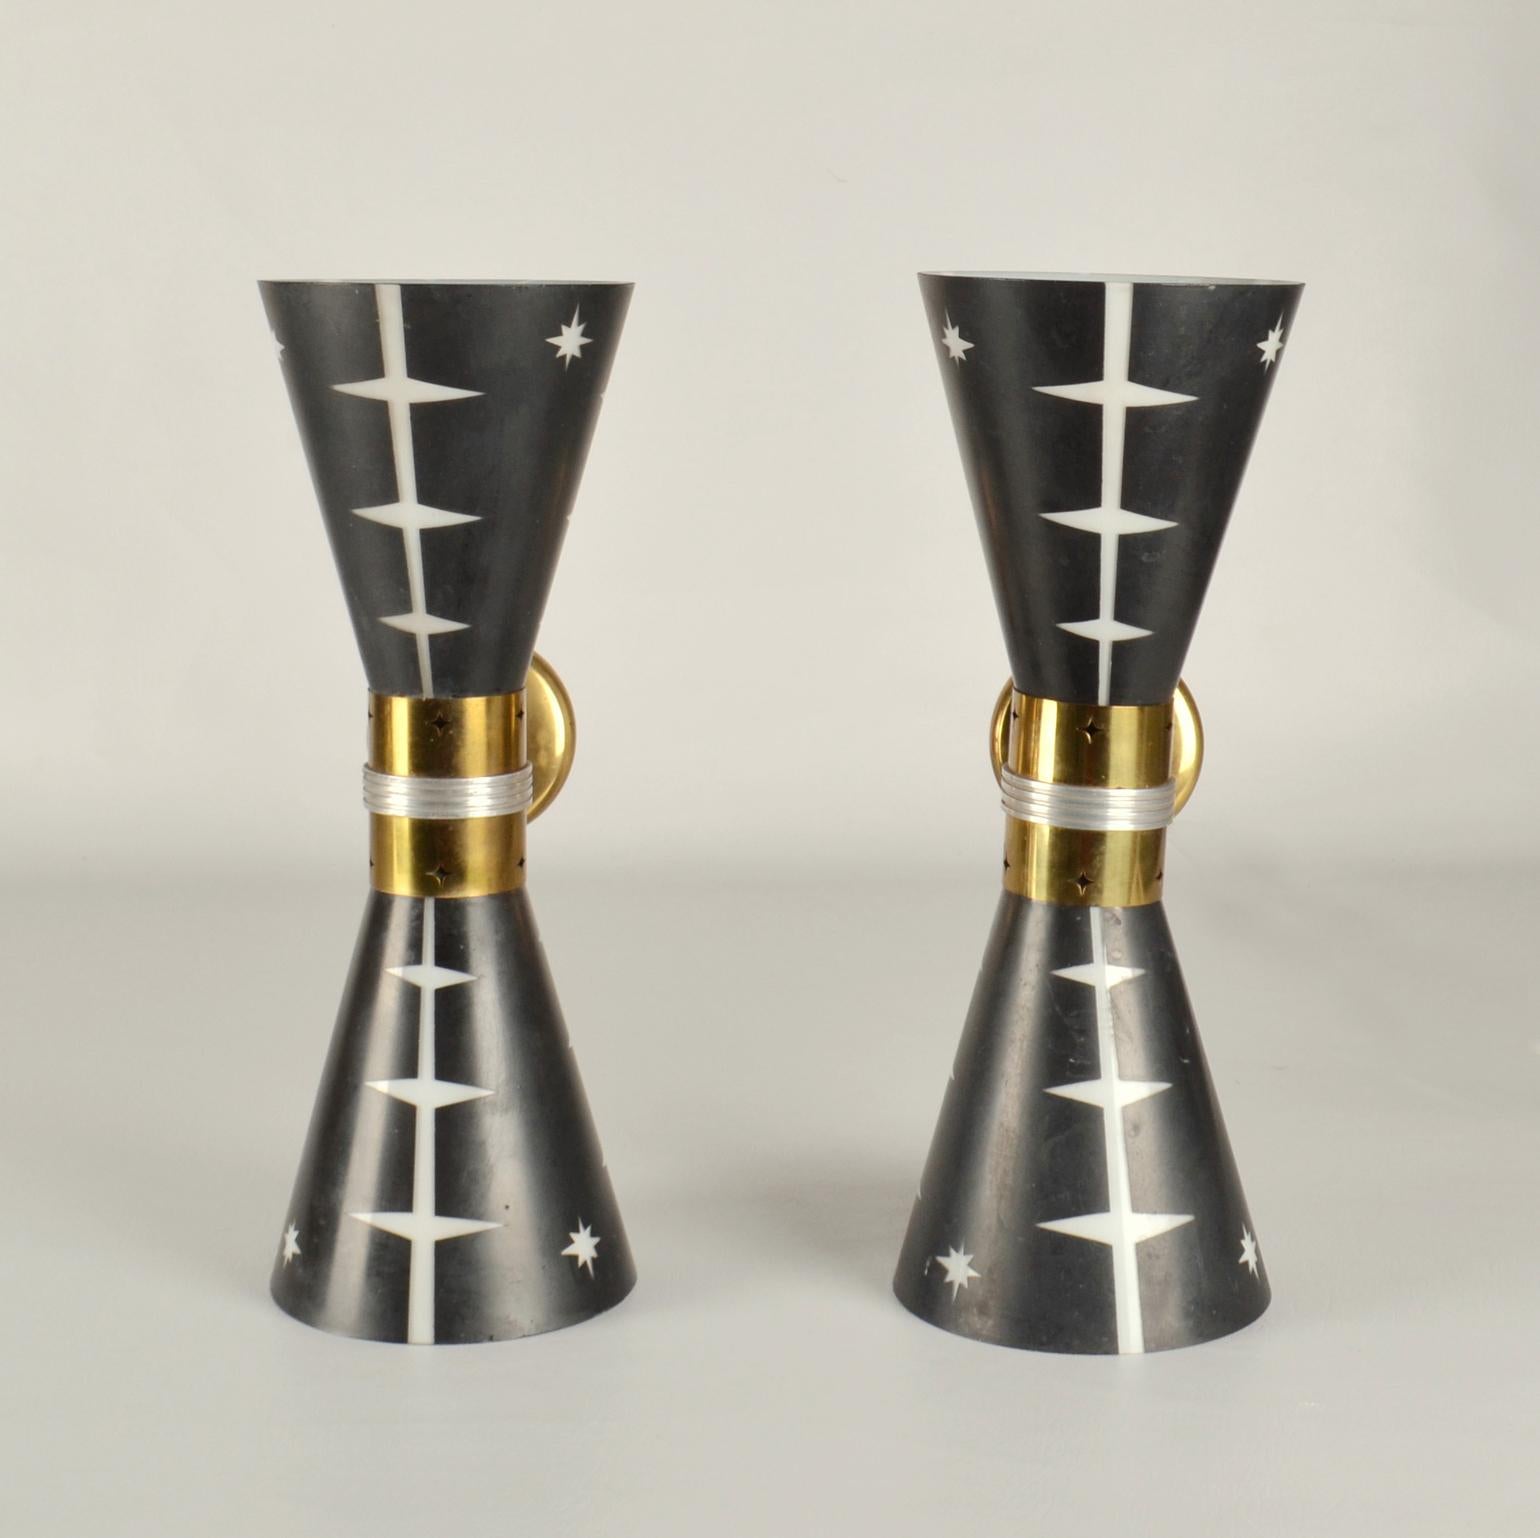 Unique large hourglass wall sconces are designed with up and down light from the conical blown glass shades in opal glass with an  outer body layer of black glass that is etched on the outside to reveal a star shape pattern that illuminates its